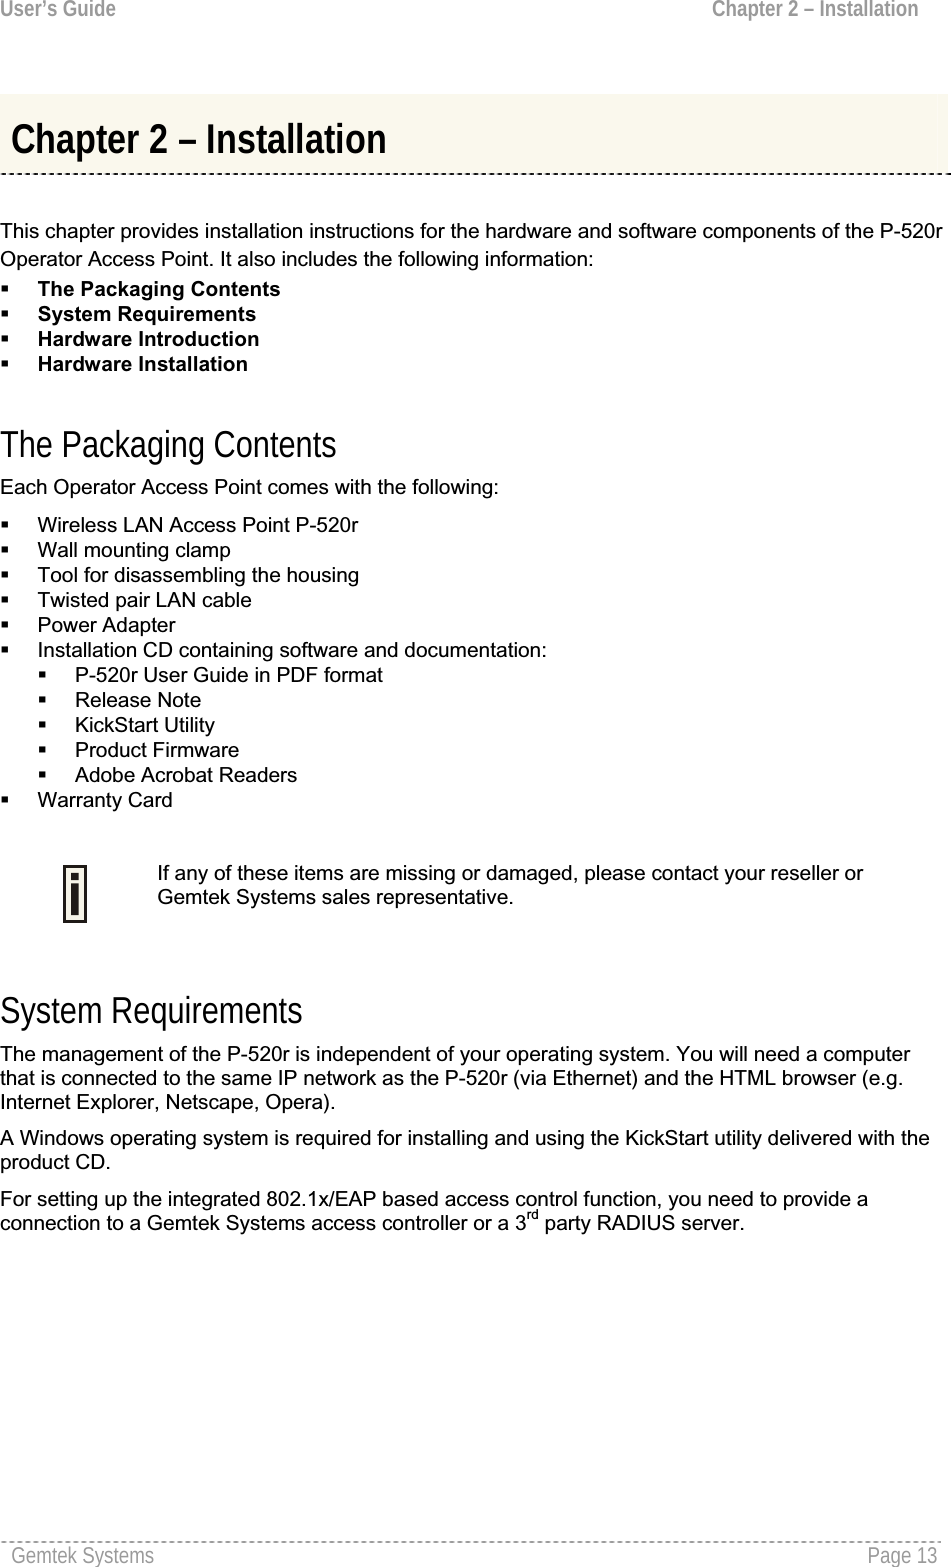 User’s Guide  Chapter 2 – InstallationChapter 2 – Installation This chapter provides installation instructions for the hardware and software components of the P-520rOperator Access Point. It also includes the following information:The Packaging ContentsSystem RequirementsHardware IntroductionHardware Installation The Packaging Contents Each Operator Access Point comes with the following:Wireless LAN Access Point P-520rWall mounting clampTool for disassembling the housingTwisted pair LAN cable Power AdapterInstallation CD containing software and documentation:P-520r User Guide in PDF format  Release Note KickStart Utility Product FirmwareAdobe Acrobat Readers Warranty CardIf any of these items are missing or damaged, please contact your reseller orGemtek Systems sales representative.System Requirements The management of the P-520r is independent of your operating system. You will need a computer that is connected to the same IP network as the P-520r (via Ethernet) and the HTML browser (e.g. Internet Explorer, Netscape, Opera). A Windows operating system is required for installing and using the KickStart utility delivered with the product CD. For setting up the integrated 802.1x/EAP based access control function, you need to provide a connection to a Gemtek Systems access controller or a 3rd party RADIUS server.Gemtek Systems  Page 13